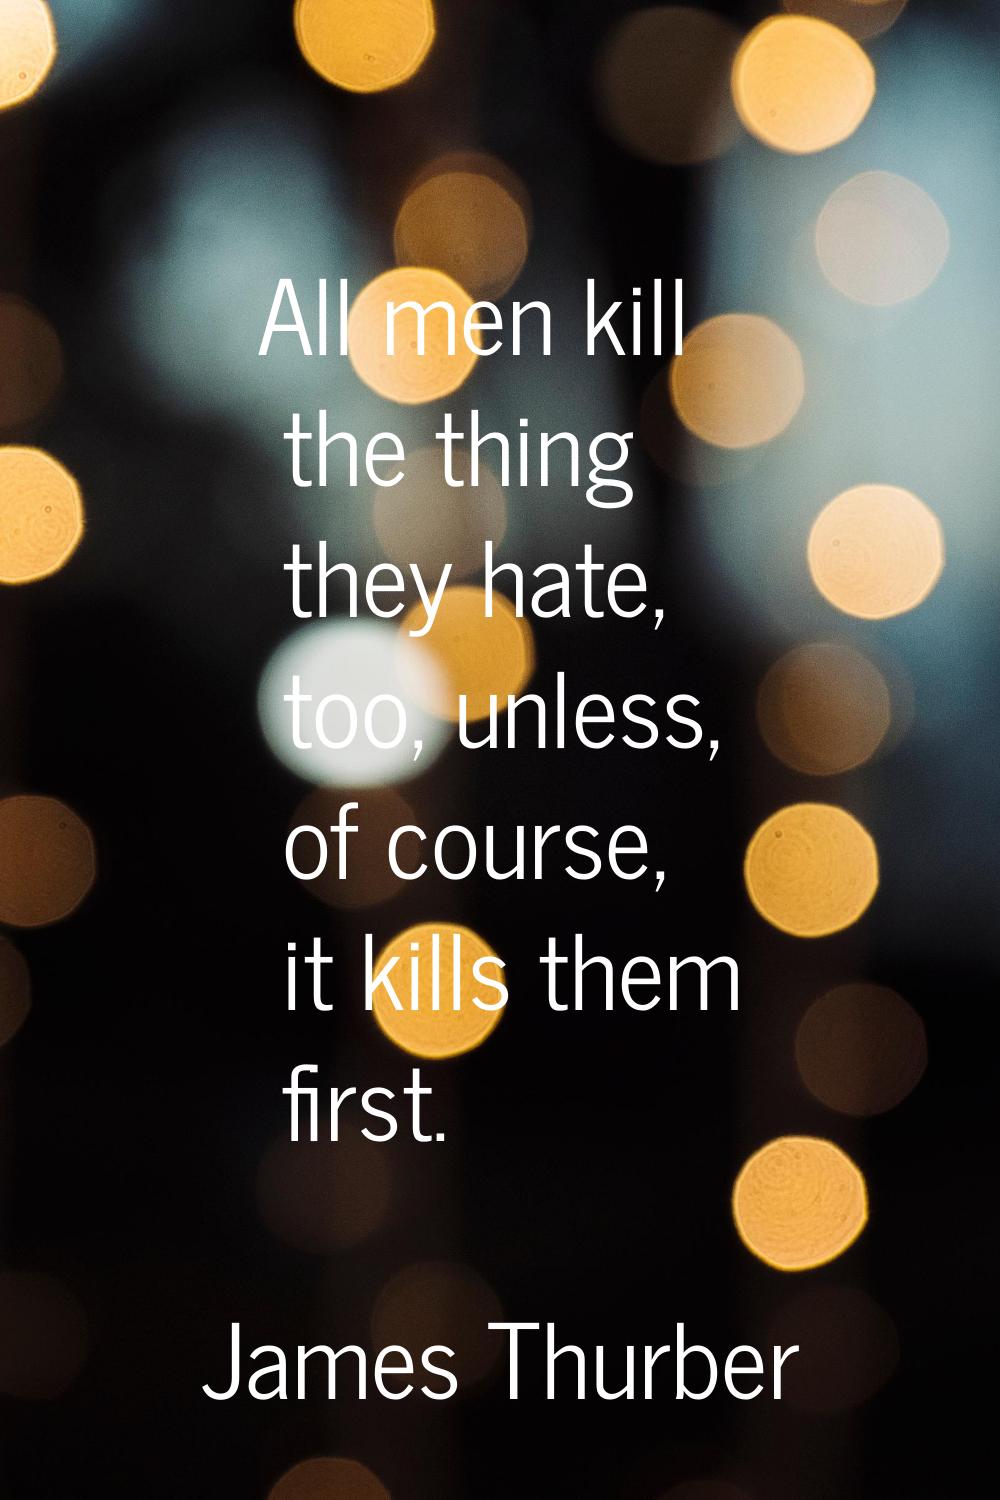 All men kill the thing they hate, too, unless, of course, it kills them first.